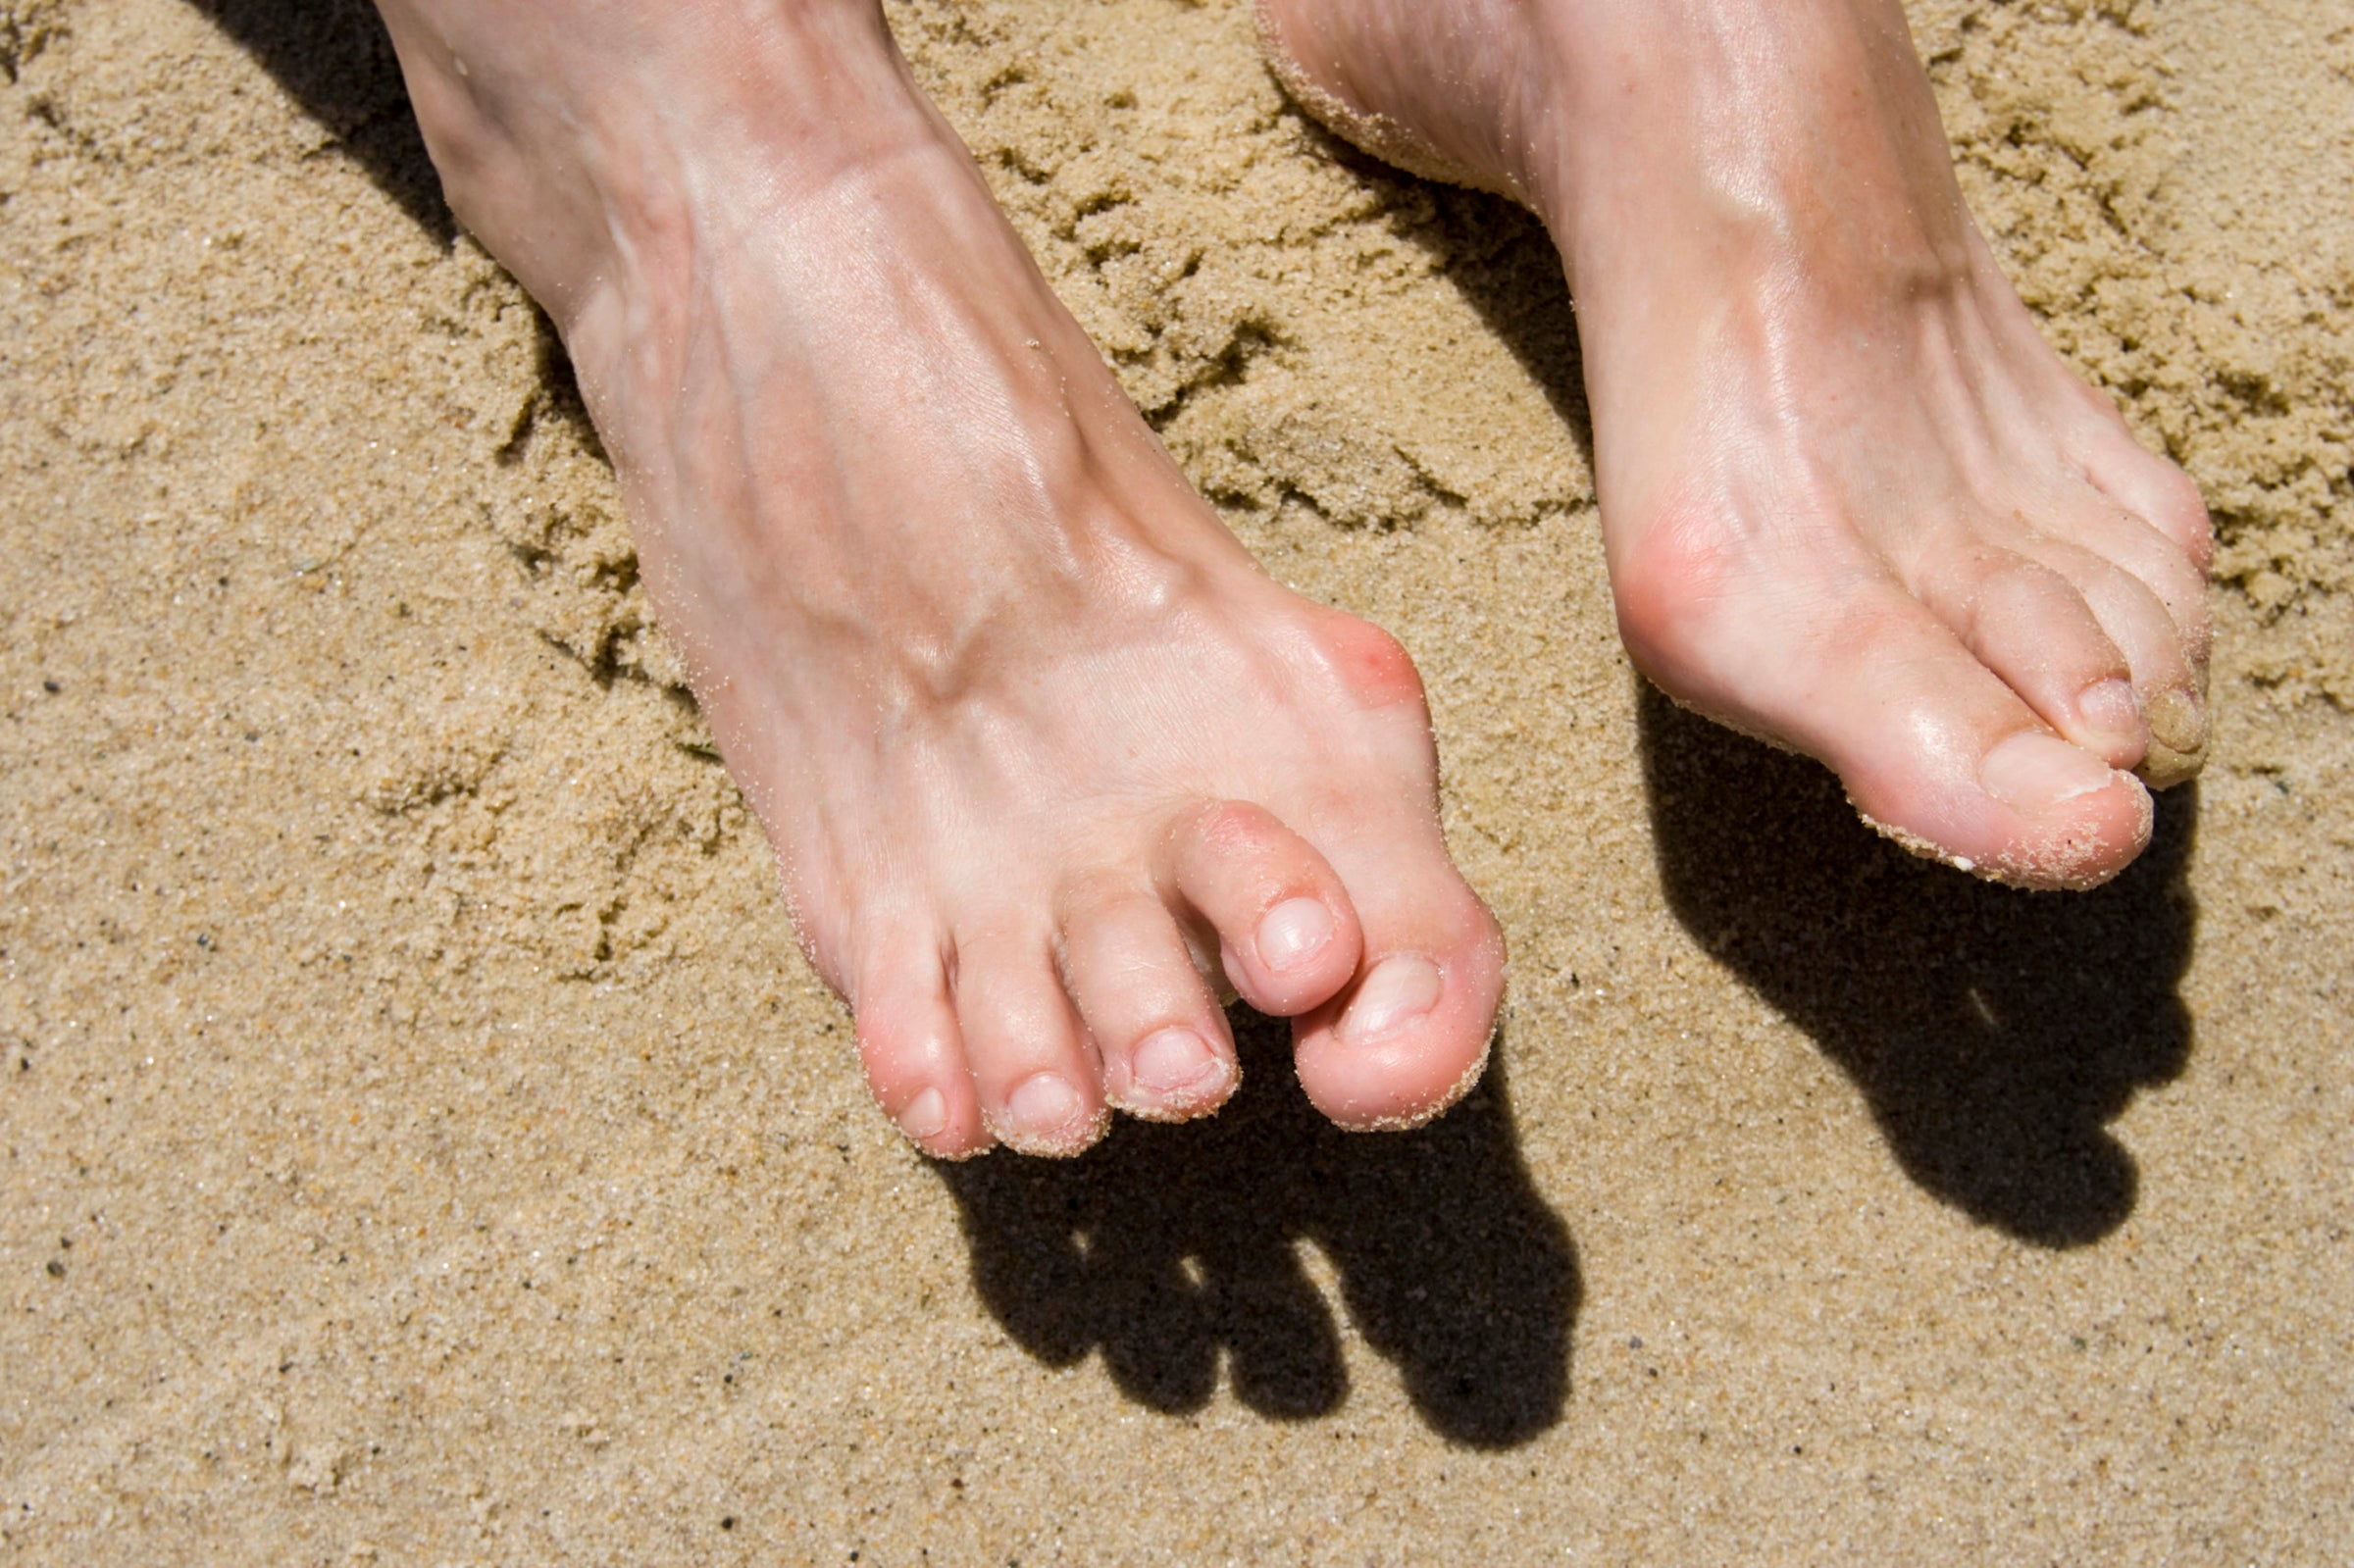 Signs and Symptoms of Claw Toes